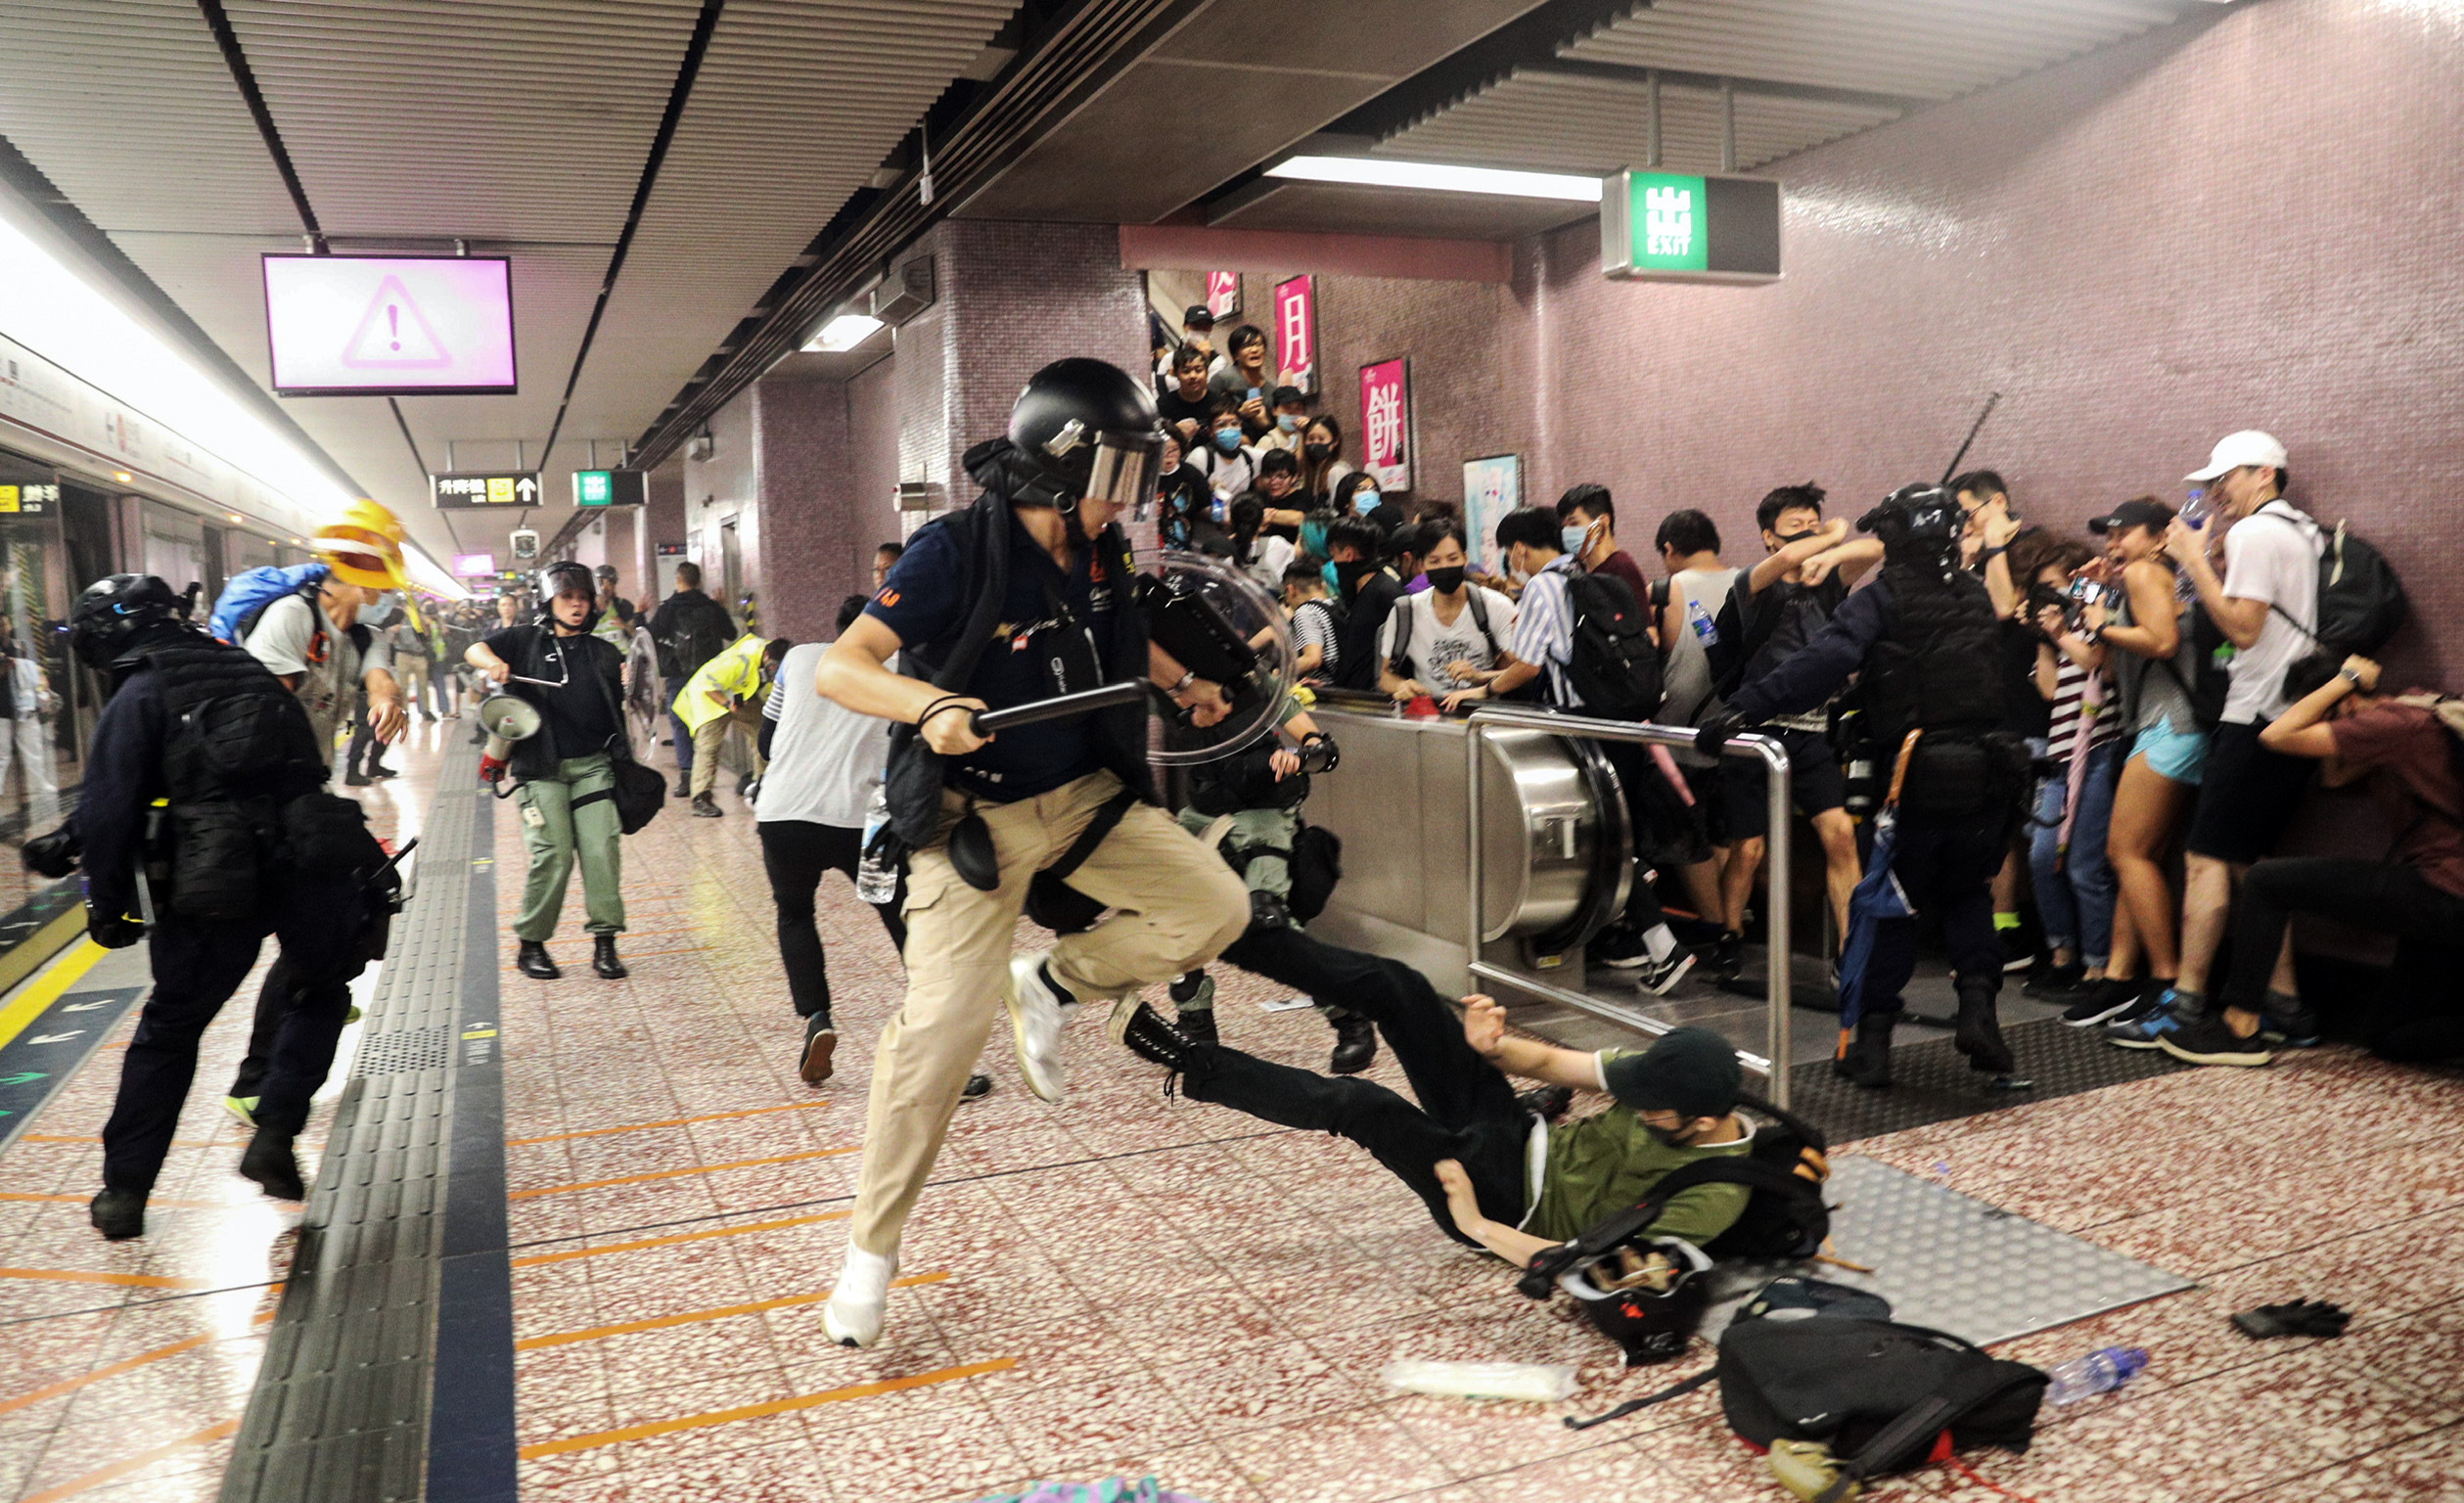 Police attempt to arrest protesters at Prince Edward MTR Station, Hong Kong, Saturday, Aug. 31, 2019. Hundreds of people are rallying in an athletic park in central Hong Kong as a 13th-straight weekend of pro-democracy protests gets underway. (Ring Yu/HK01 via AP)